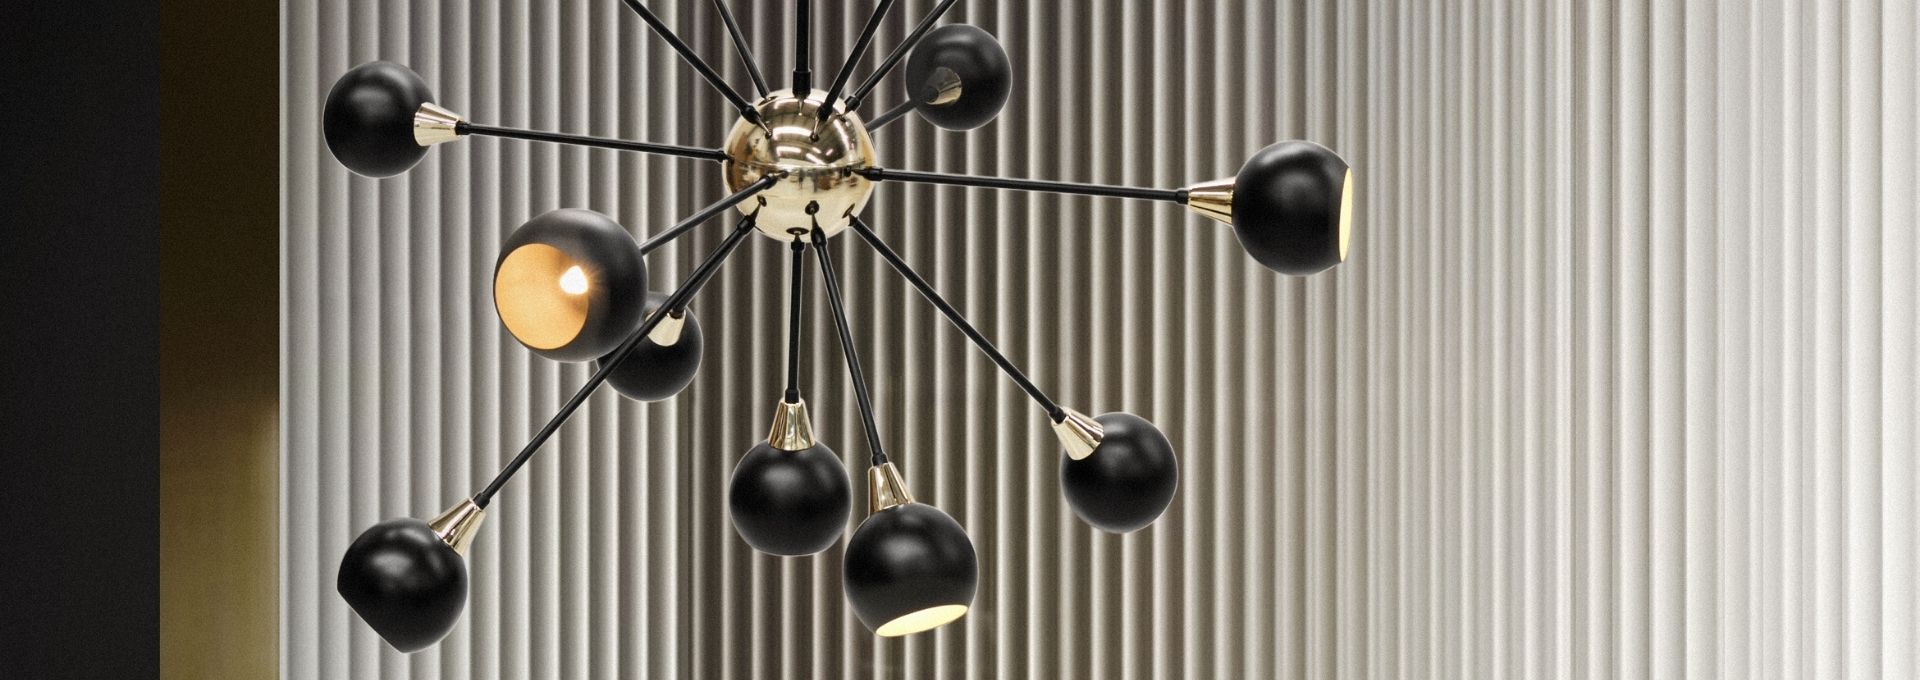 This Modern Suspension Lamp Is The WOW Piece Any Dining Room Design Needs!